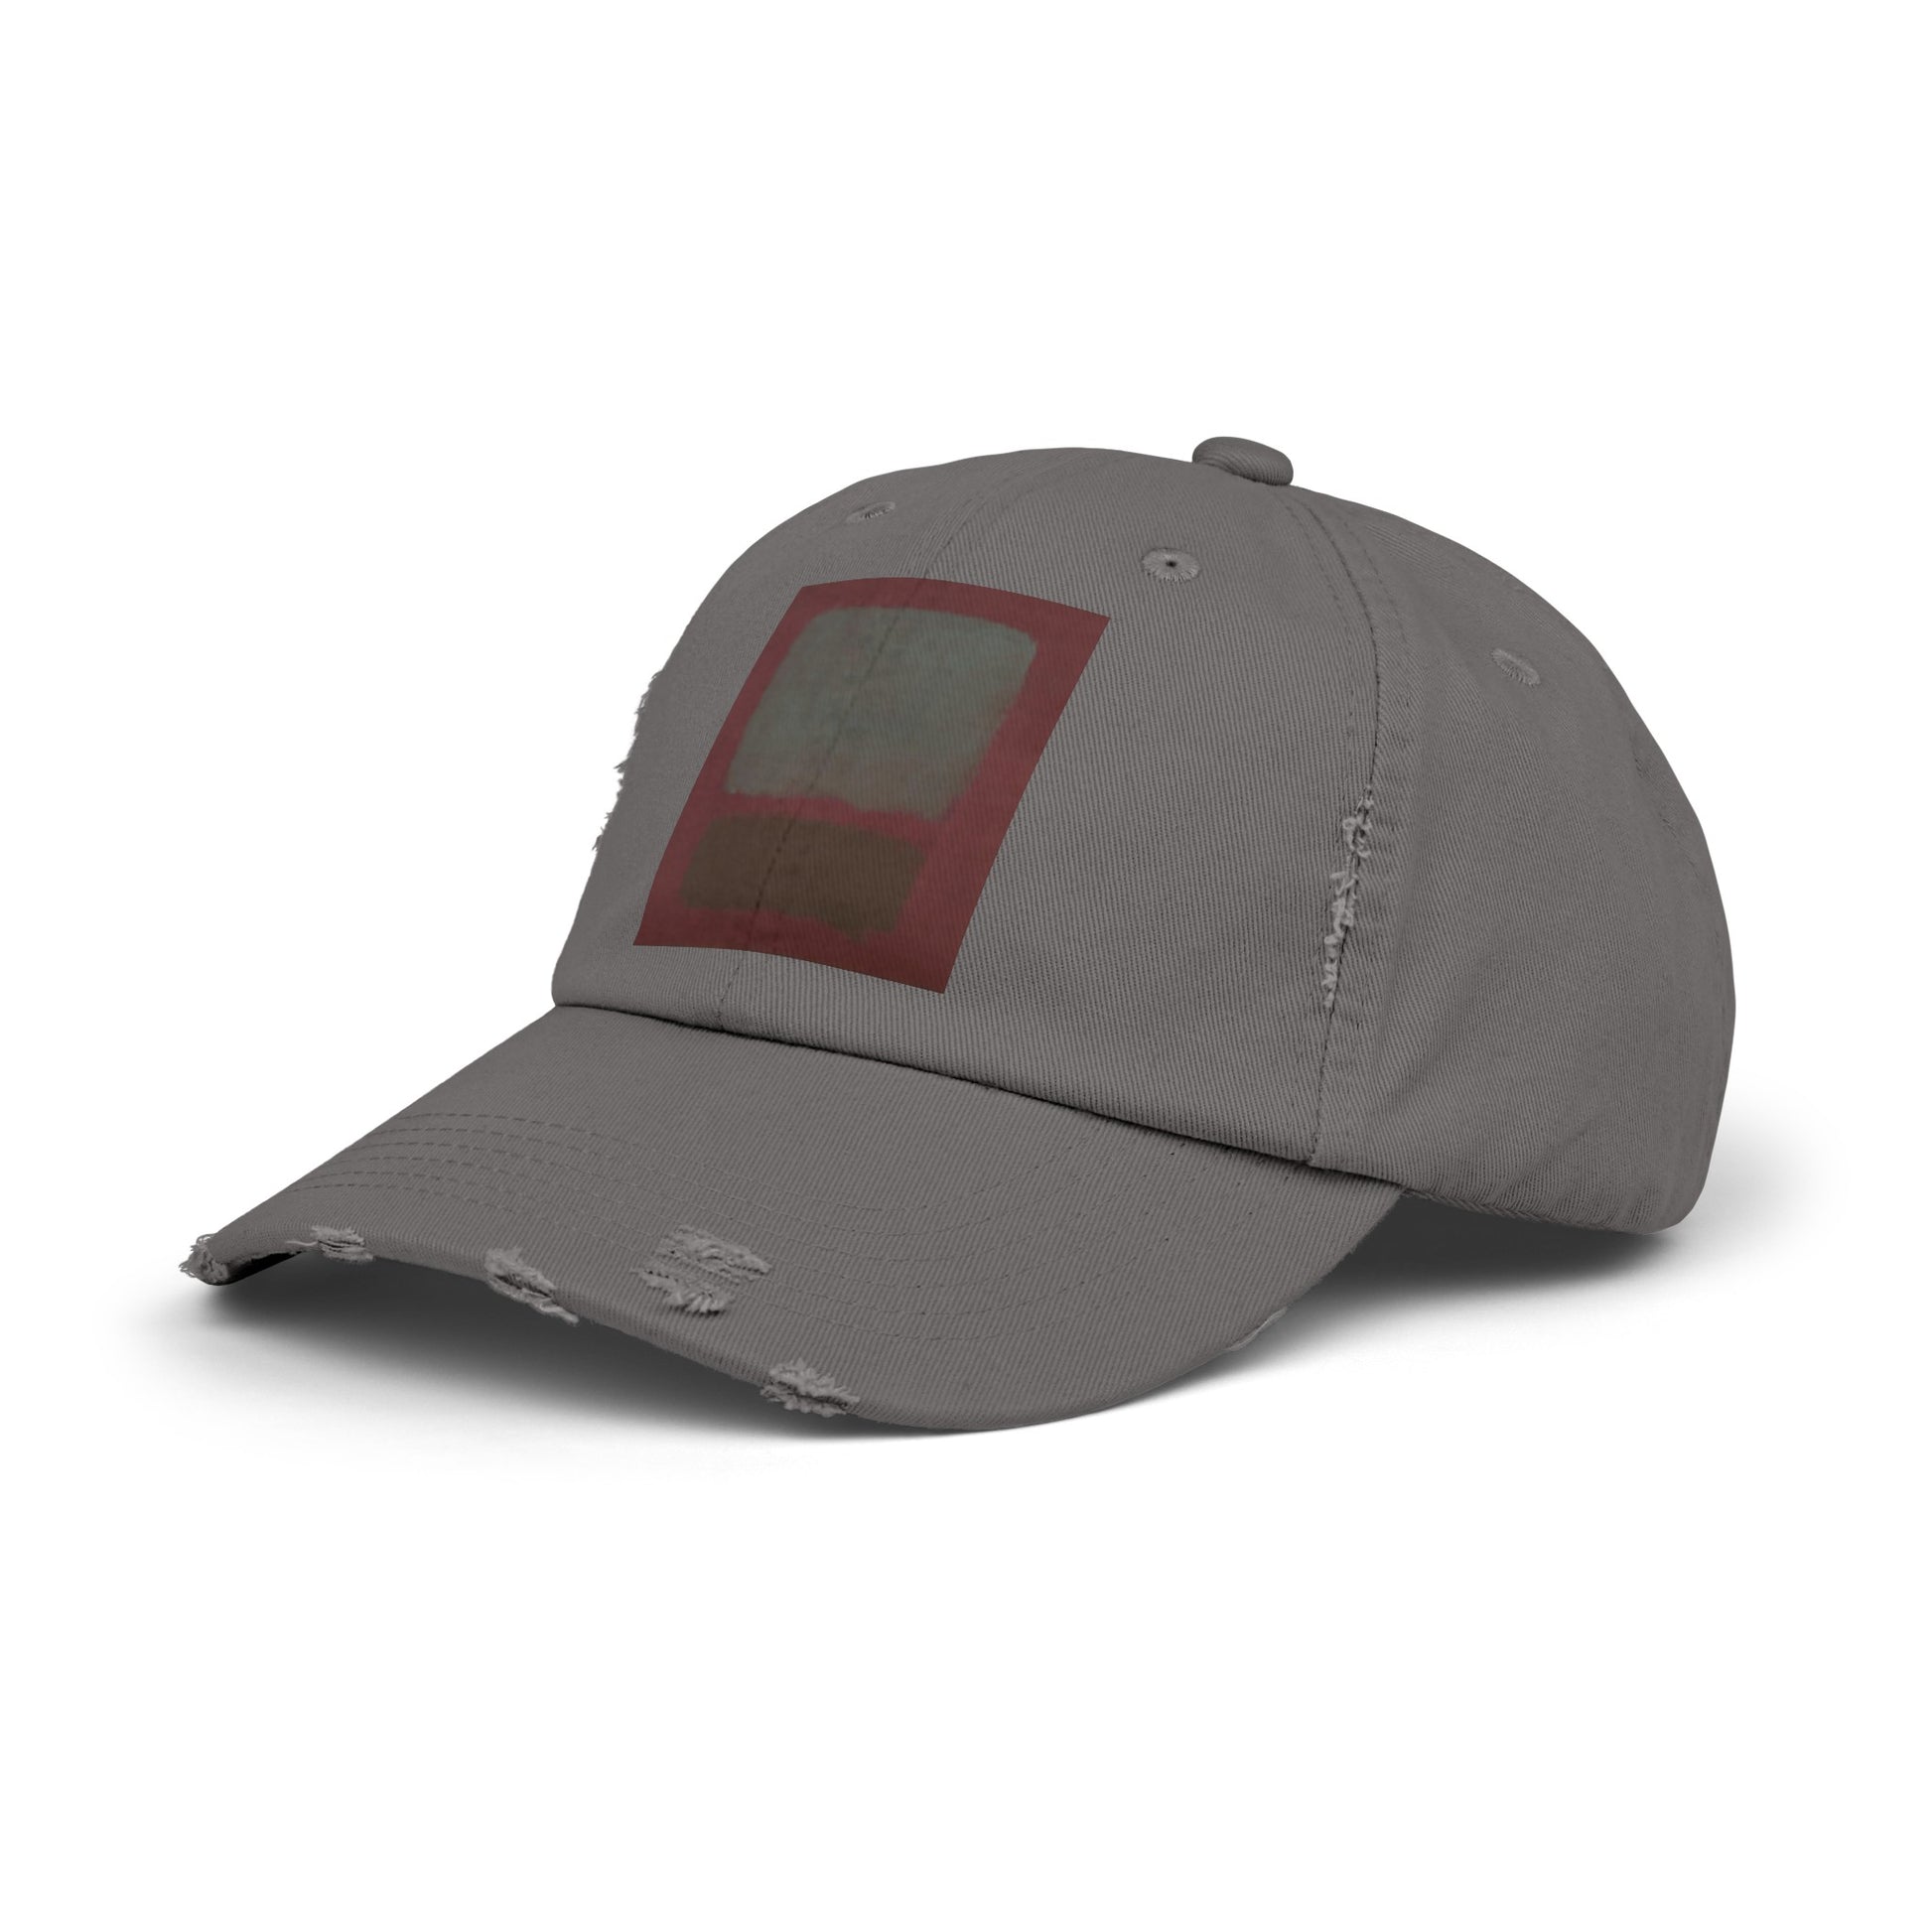 a grey hat with a red patch on the front